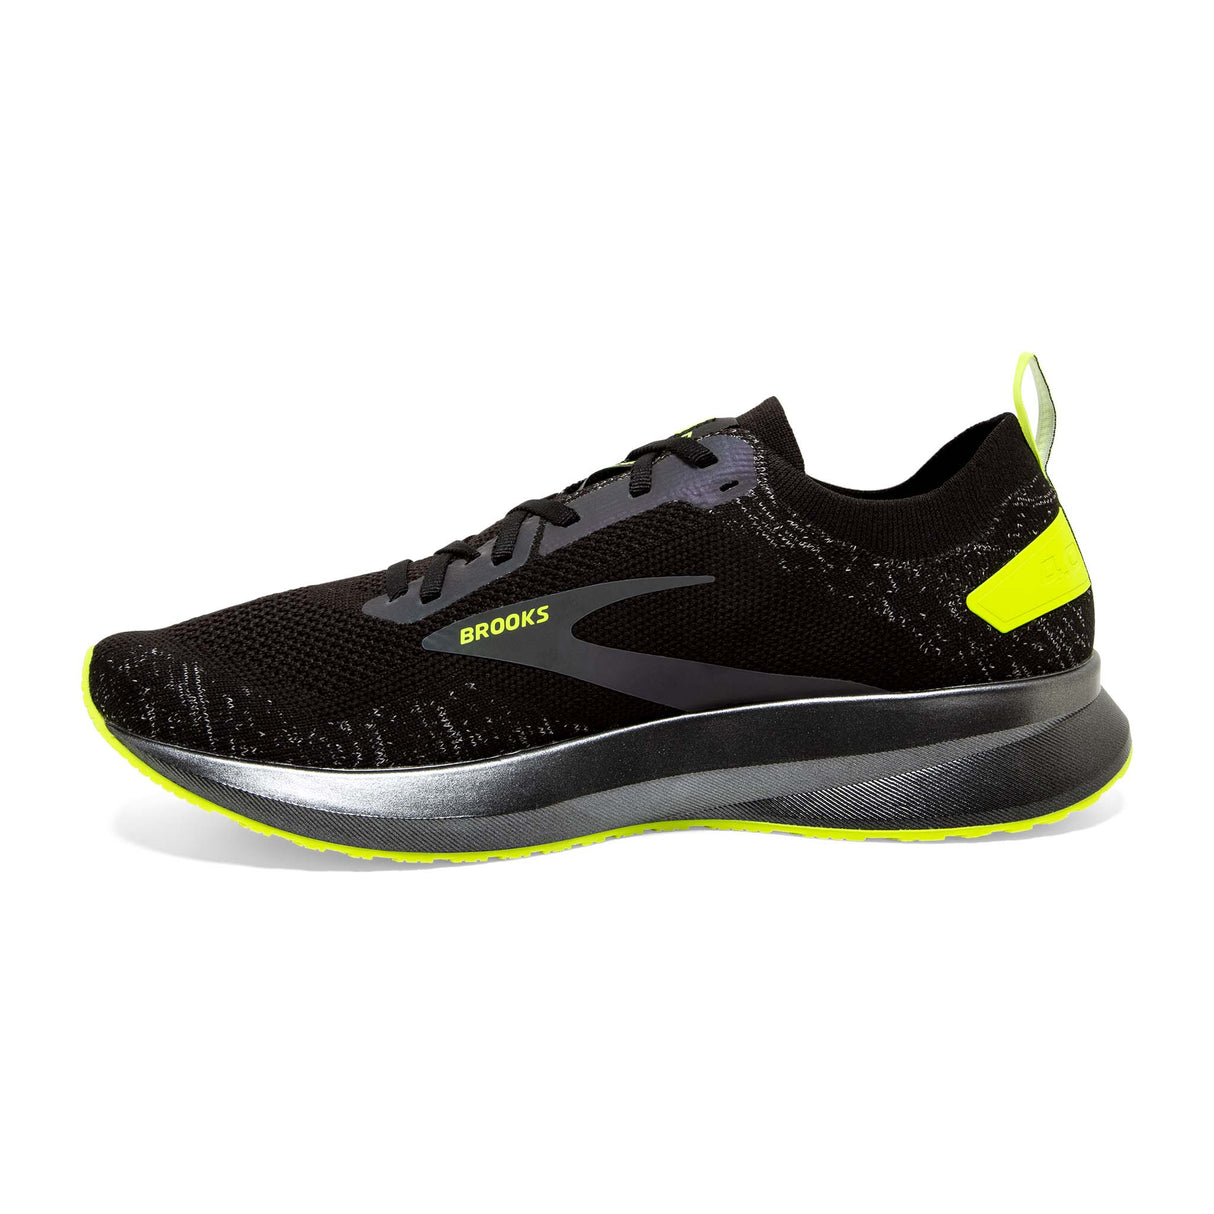 Brooks Levitate 4 Nightlife chaussures de course a pied pour homme lateral